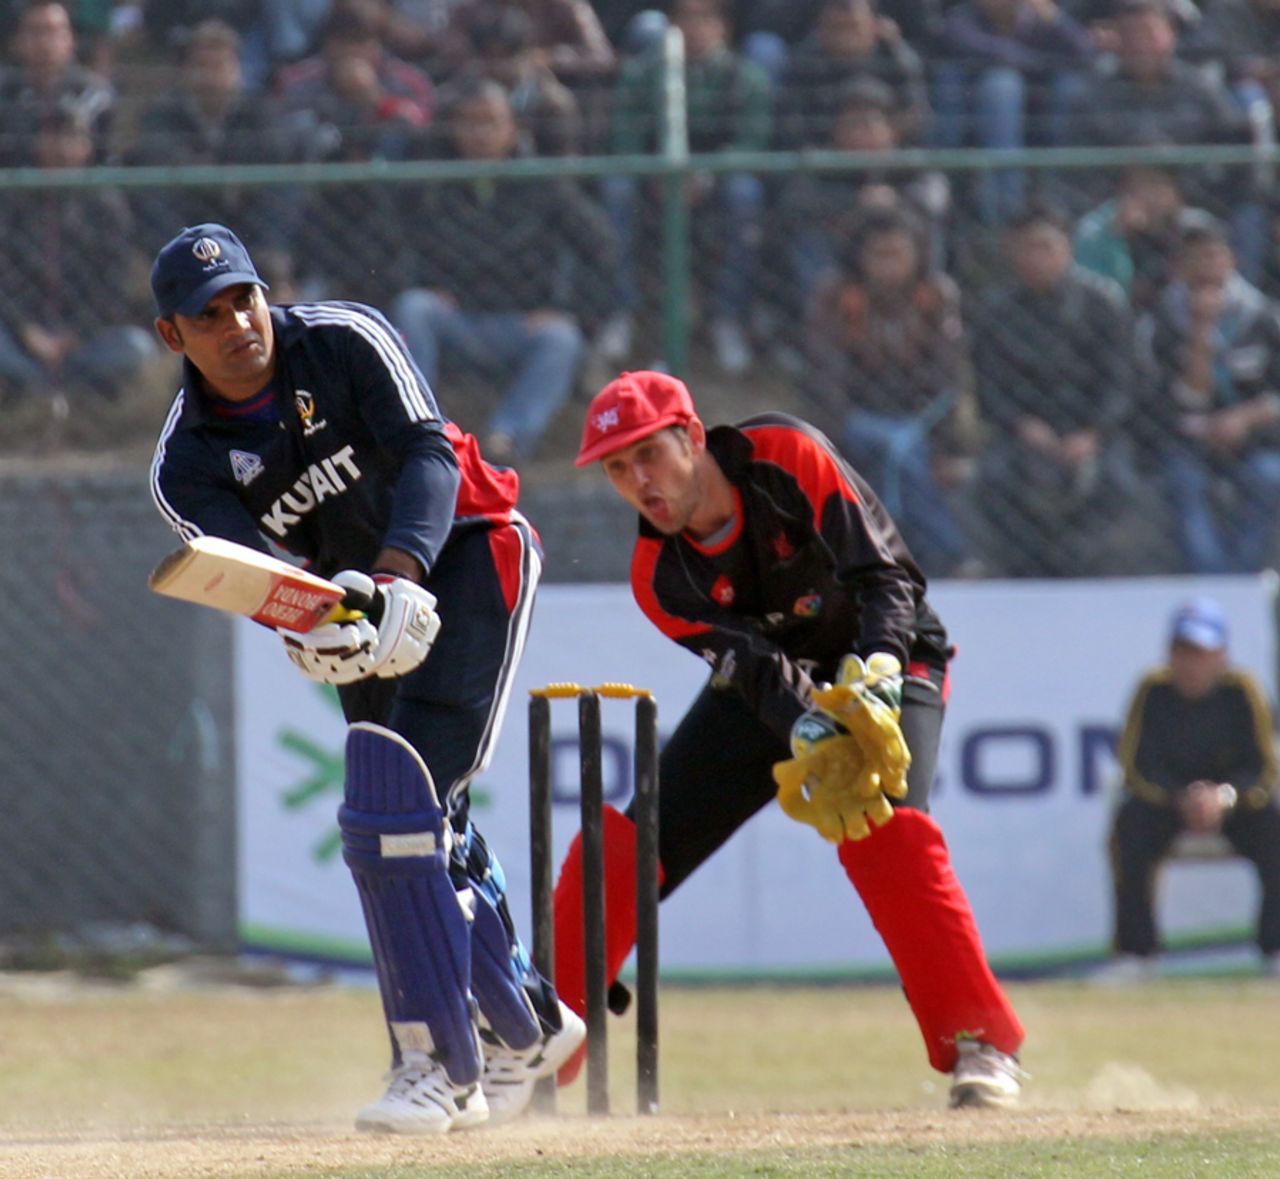 Kuwait's Mohammad Asghar hits the ball through the leg side on his way to 34 against Hong Kong at the ACC Twenty20 Cup 2011 in Kathmandu